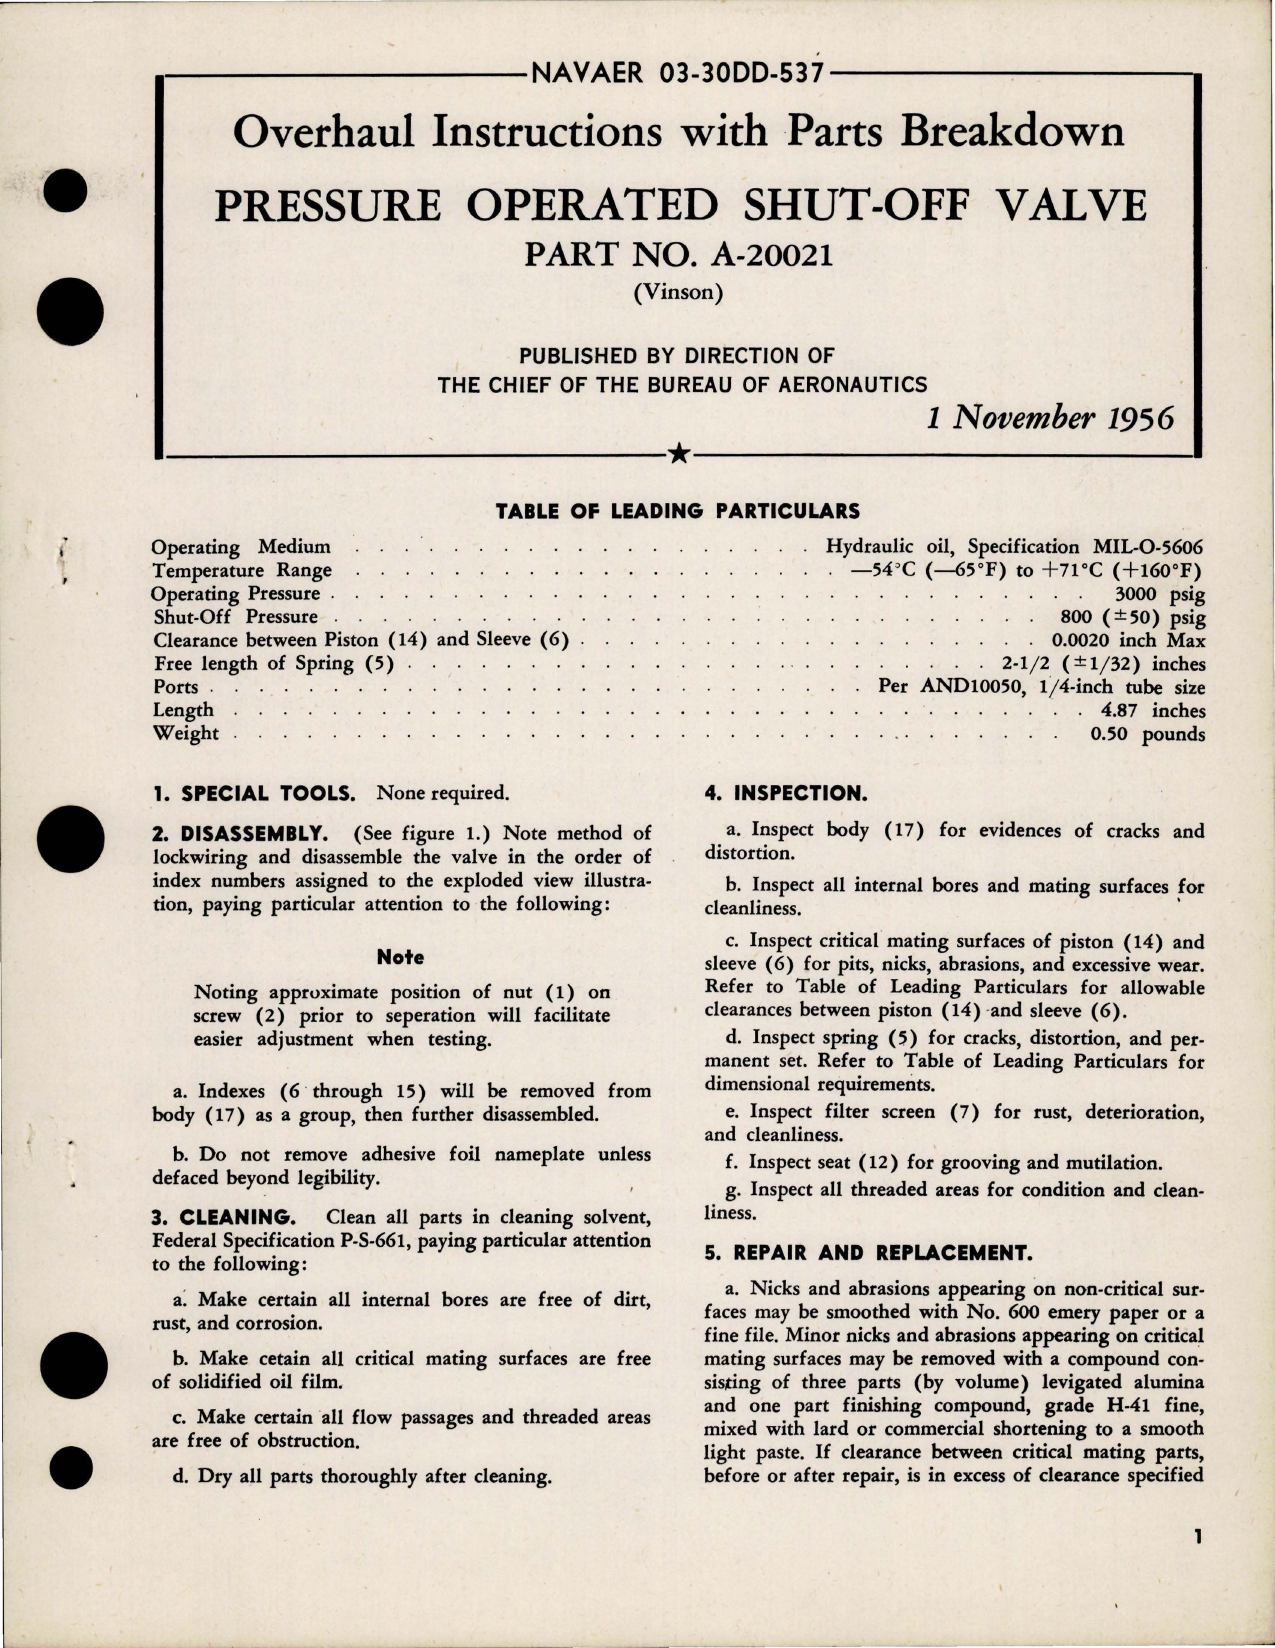 Sample page 1 from AirCorps Library document: Overhaul Instructions with Parts Breakdown for Pressure Operated Shut-Off Valve - Part A-20021